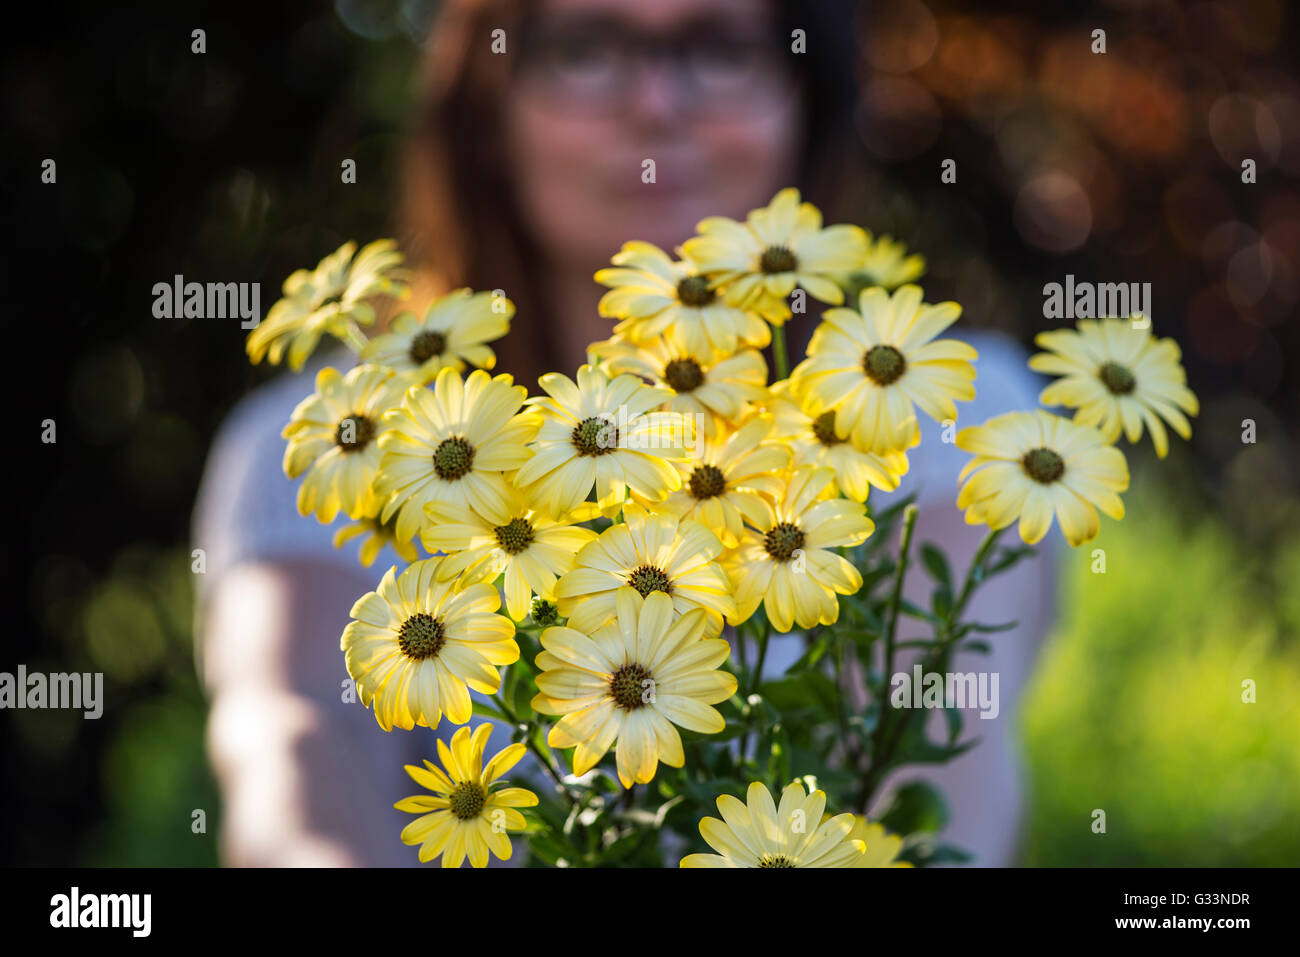 a photo of a young woman with a bouquet of flowers Stock Photo